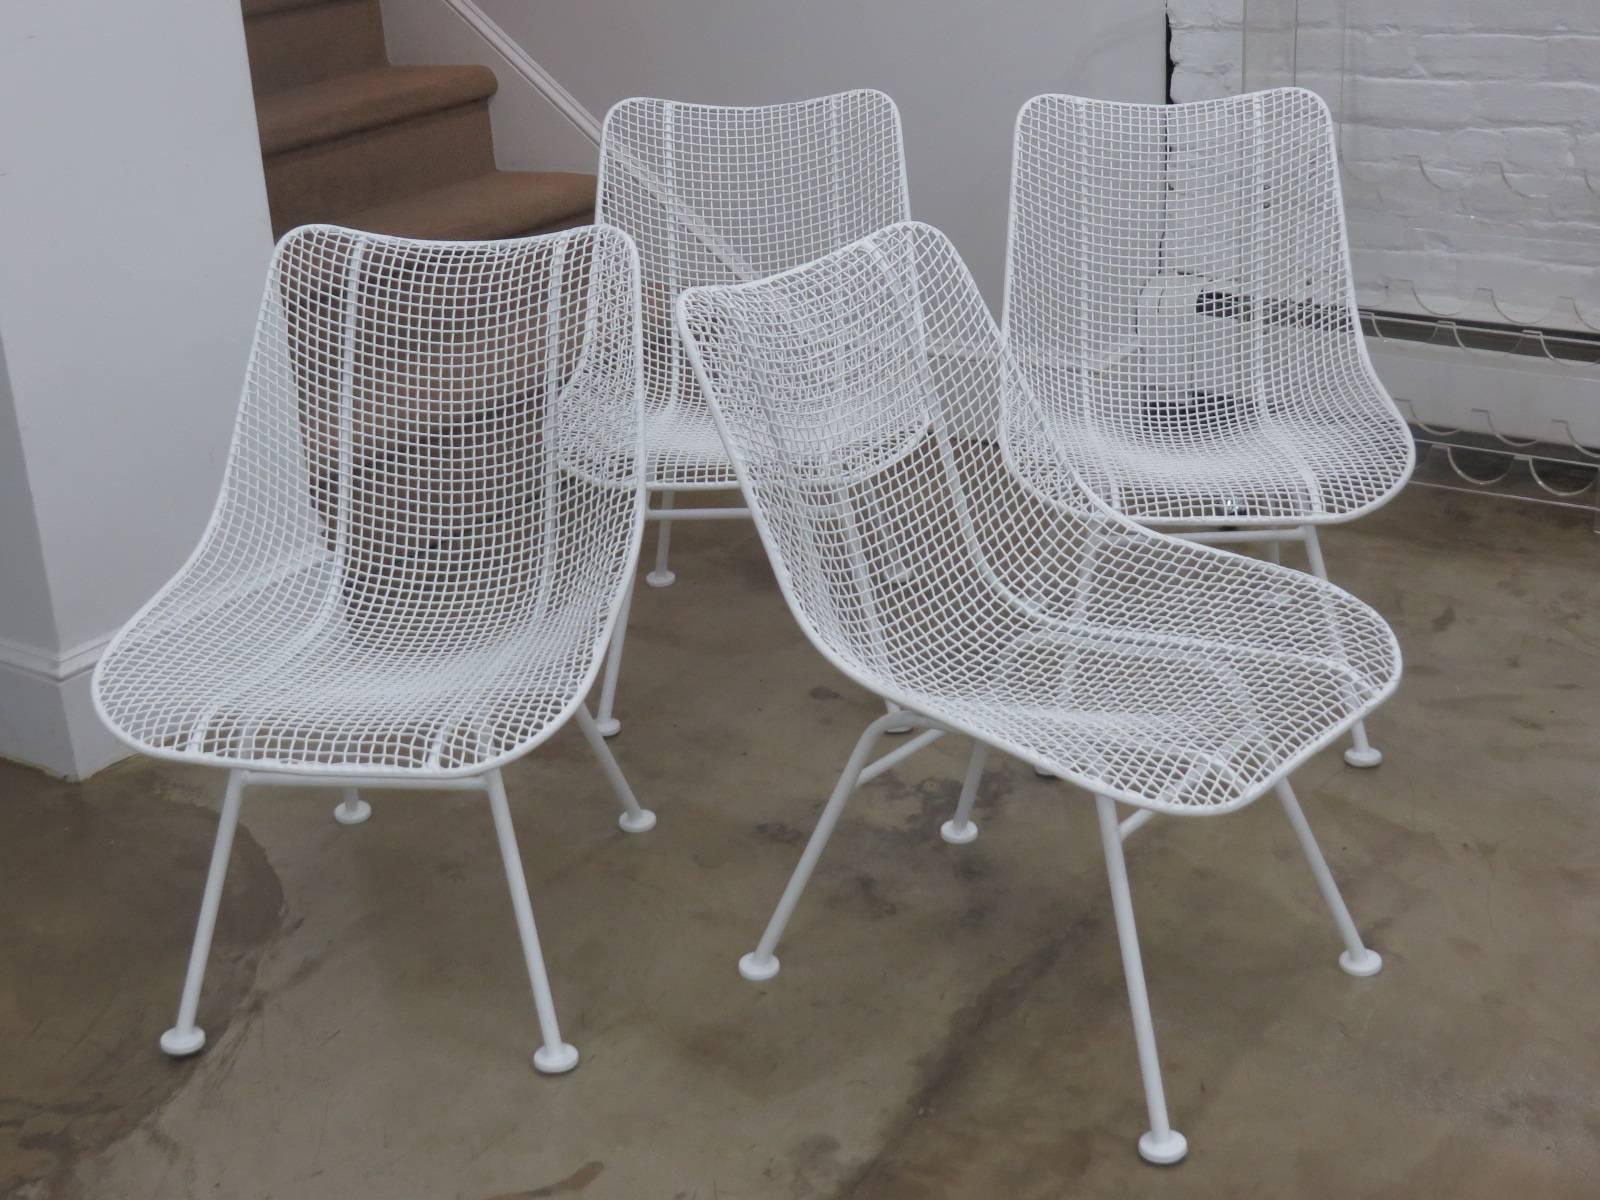 Set of four white iron mesh lounge chairs designed by Russell Woodard. Chairs can be used indoors or outdoors. Iconic Woodard from the 1950s.